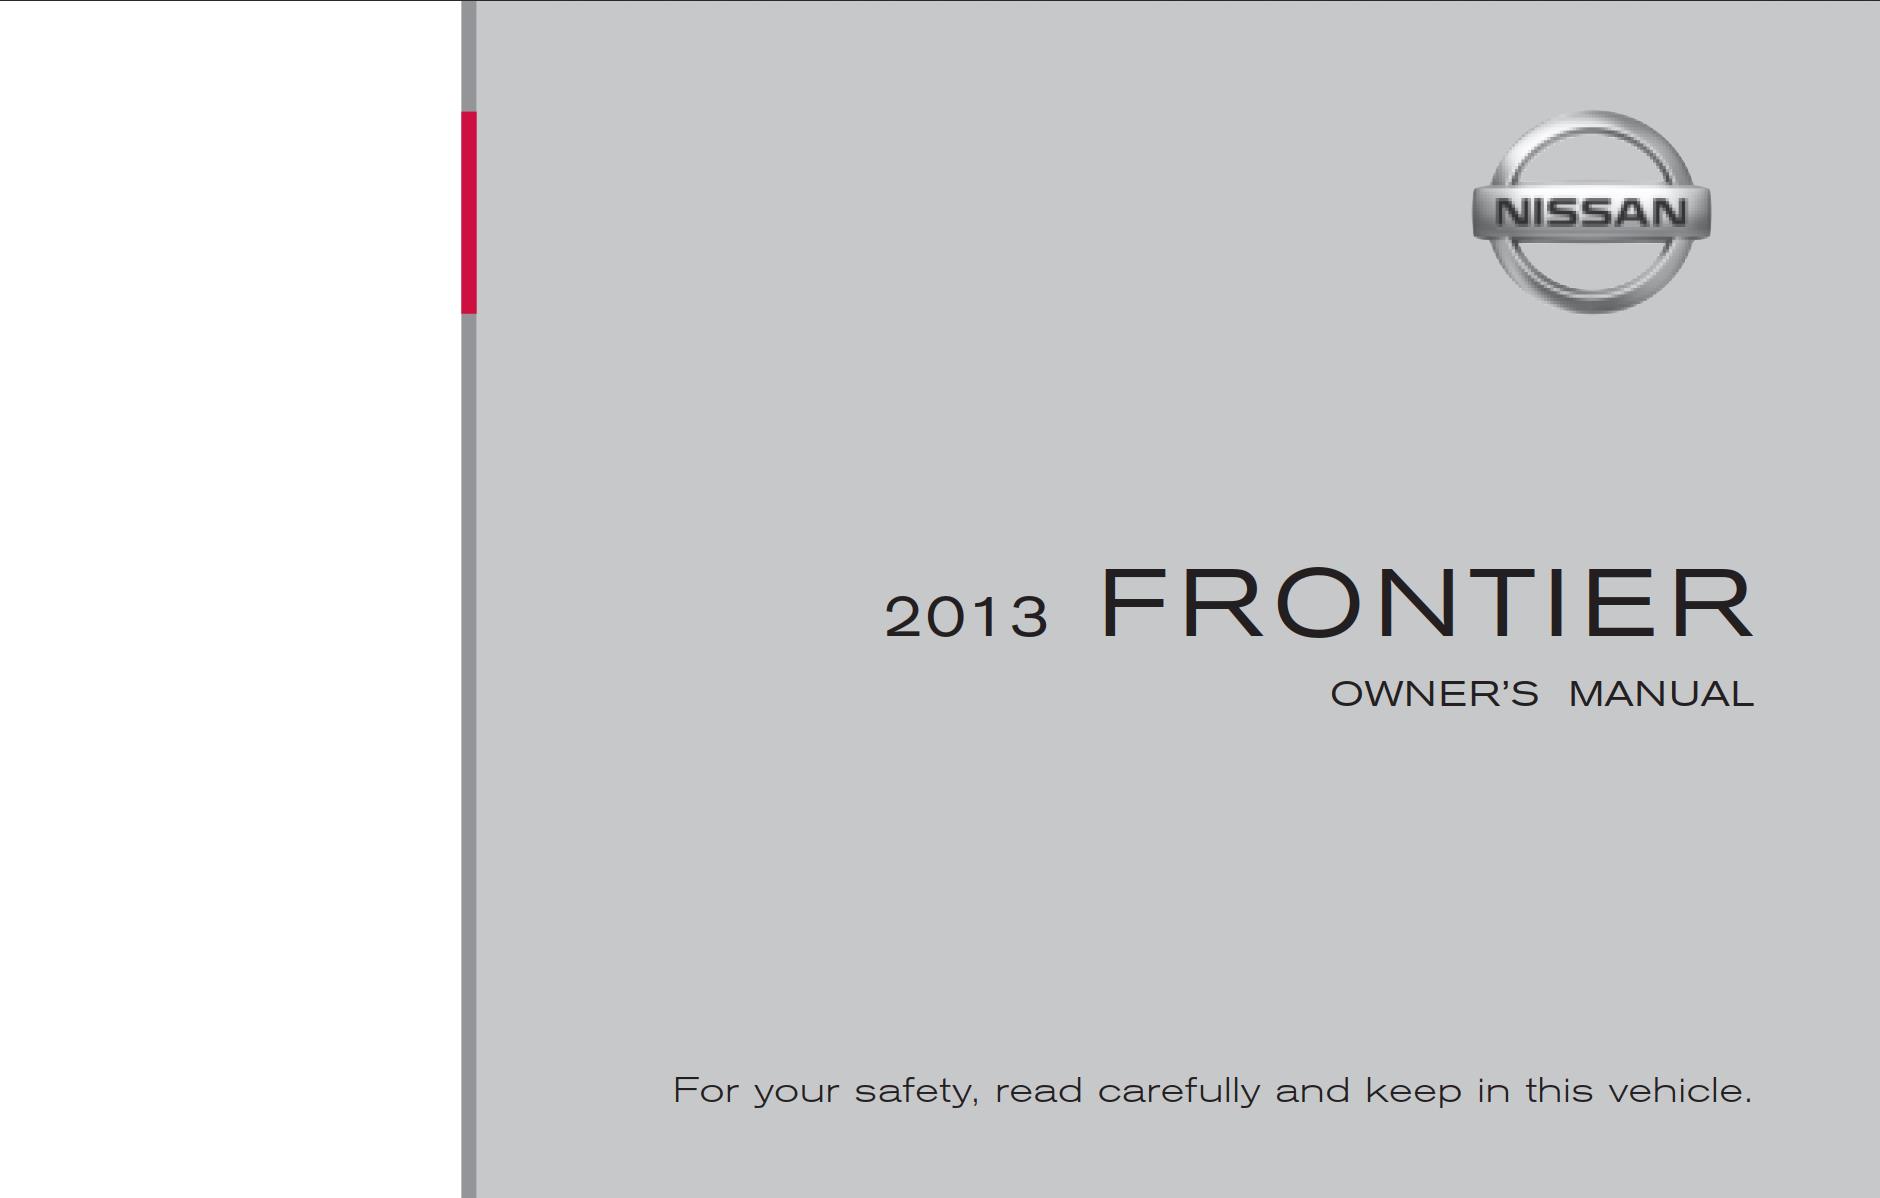 Nissan Frontier 2013 Owner's Manual – PDF Download